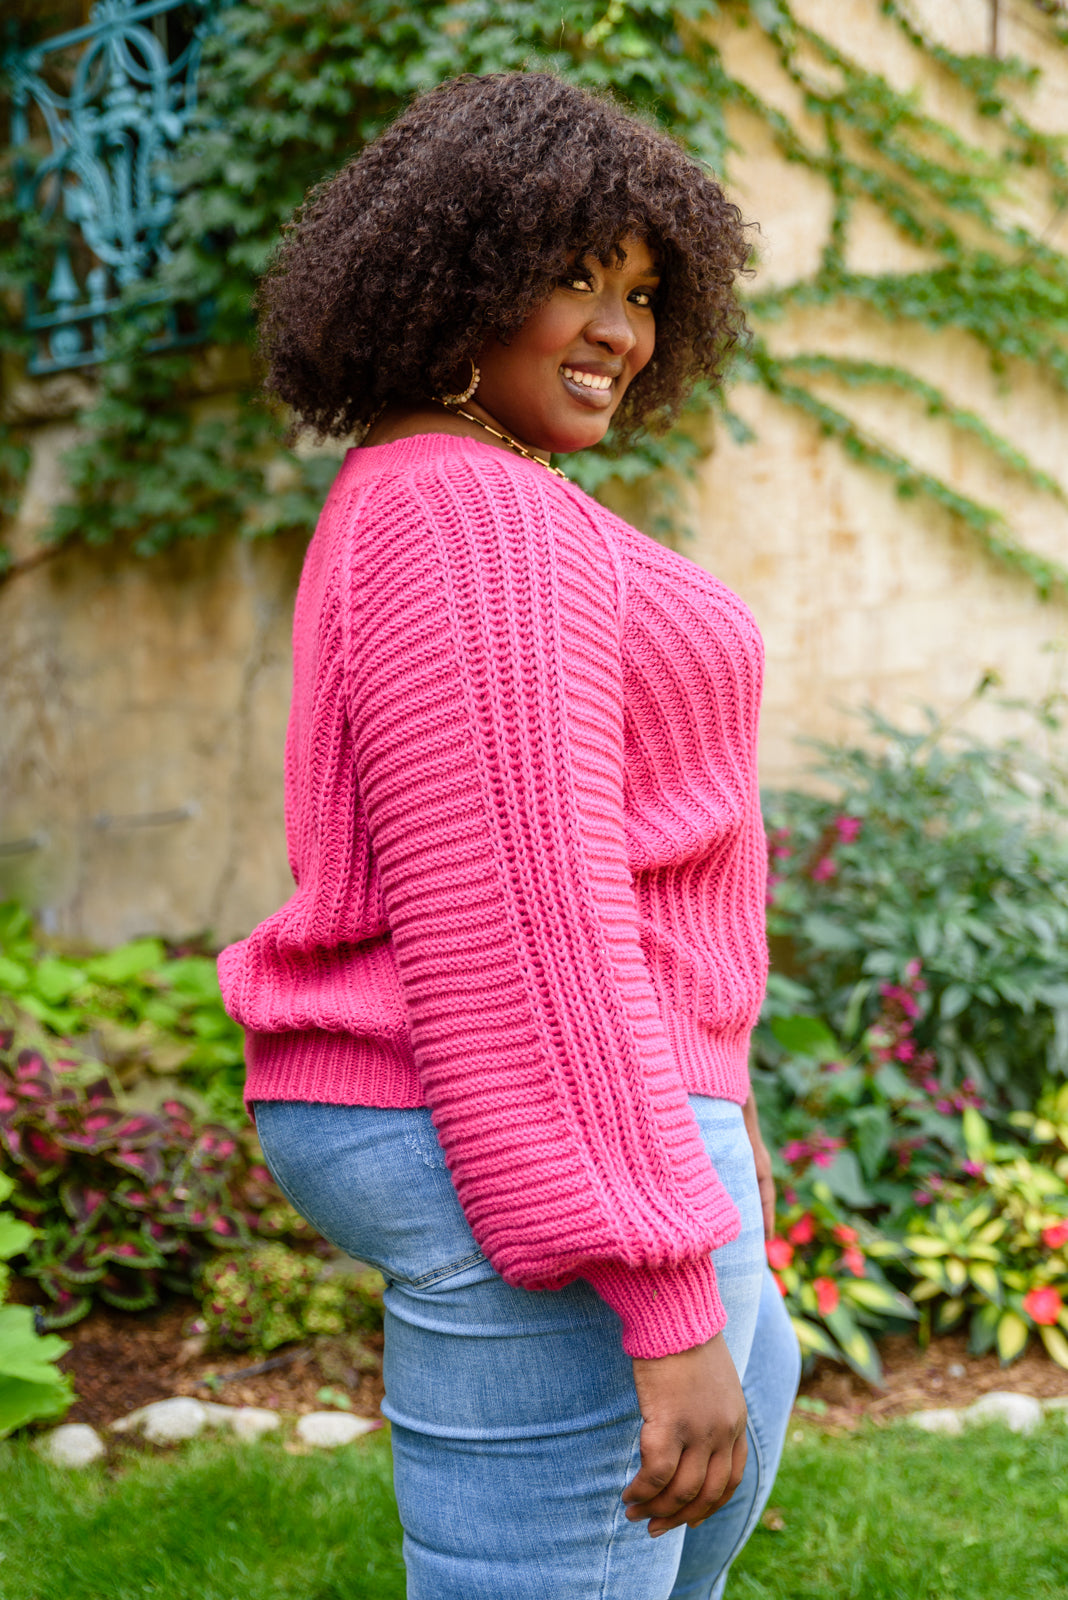 Claim The Stage Knit Sweater In Hot Pink (Online Exclusive)